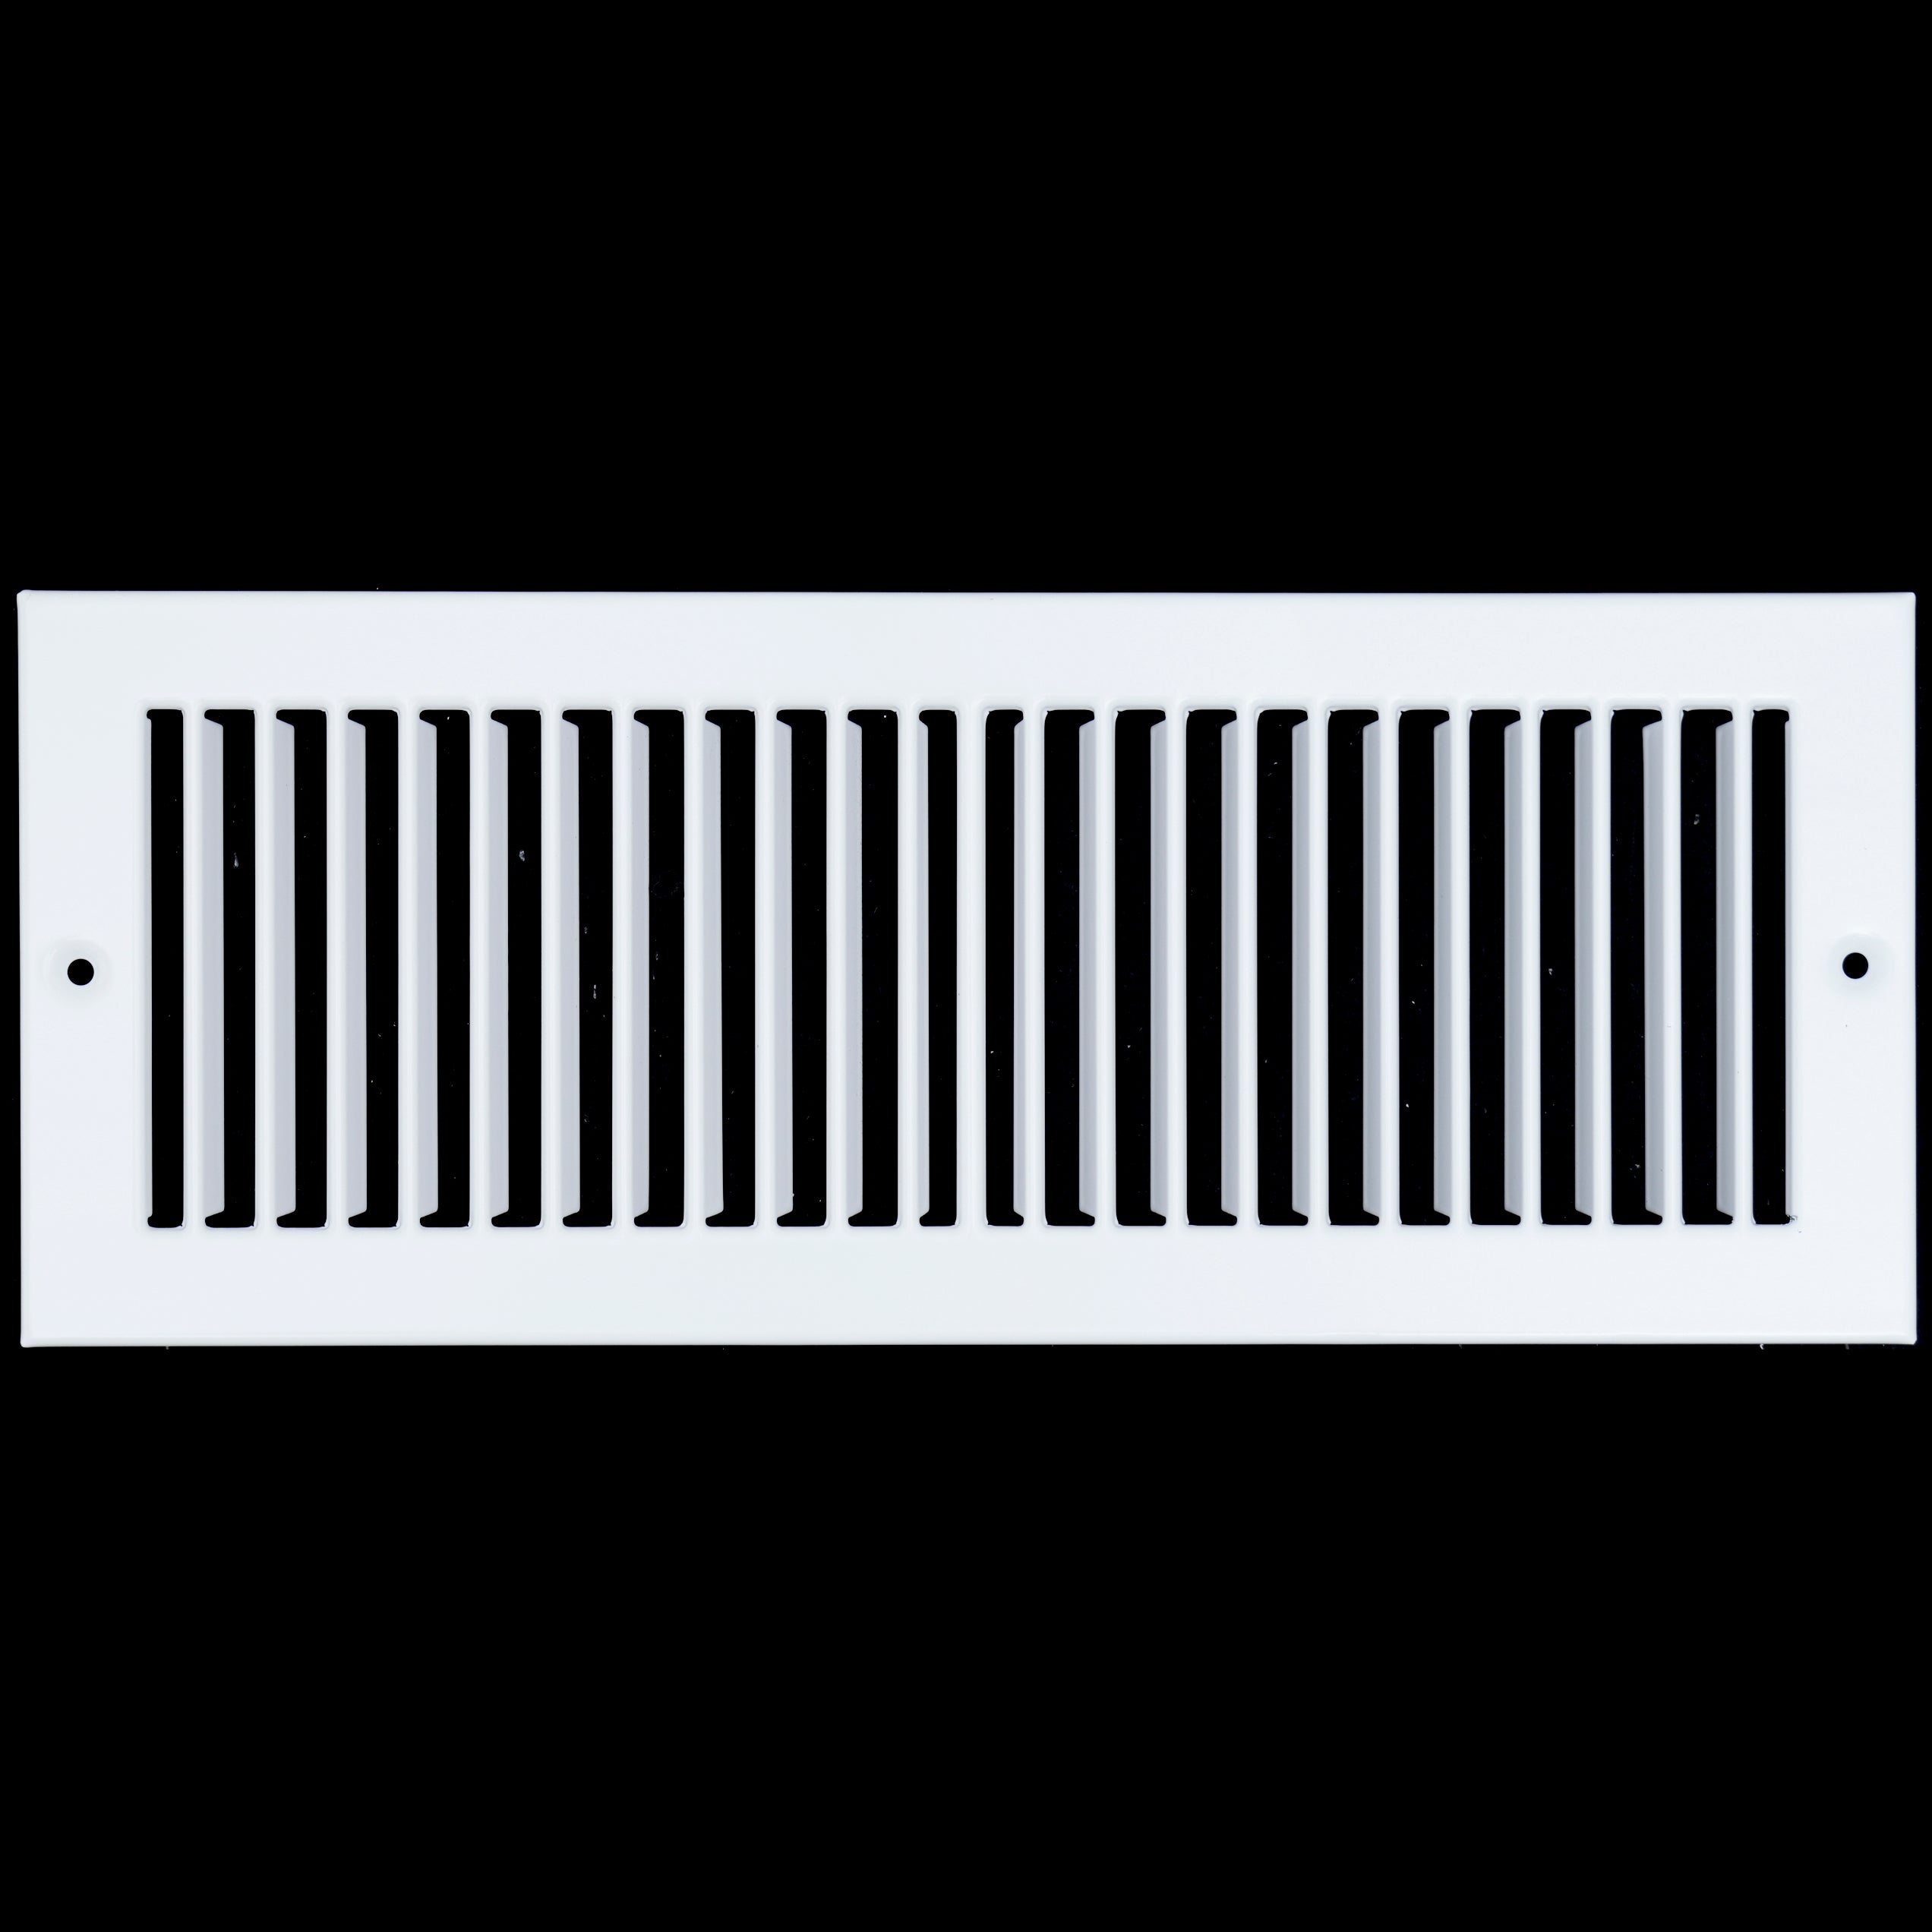 airgrilles 4" x 12" toe kick register grille vent cover outer dimensions: 5.5" x 13.5" white hnd-tgs-wh-4x12  1